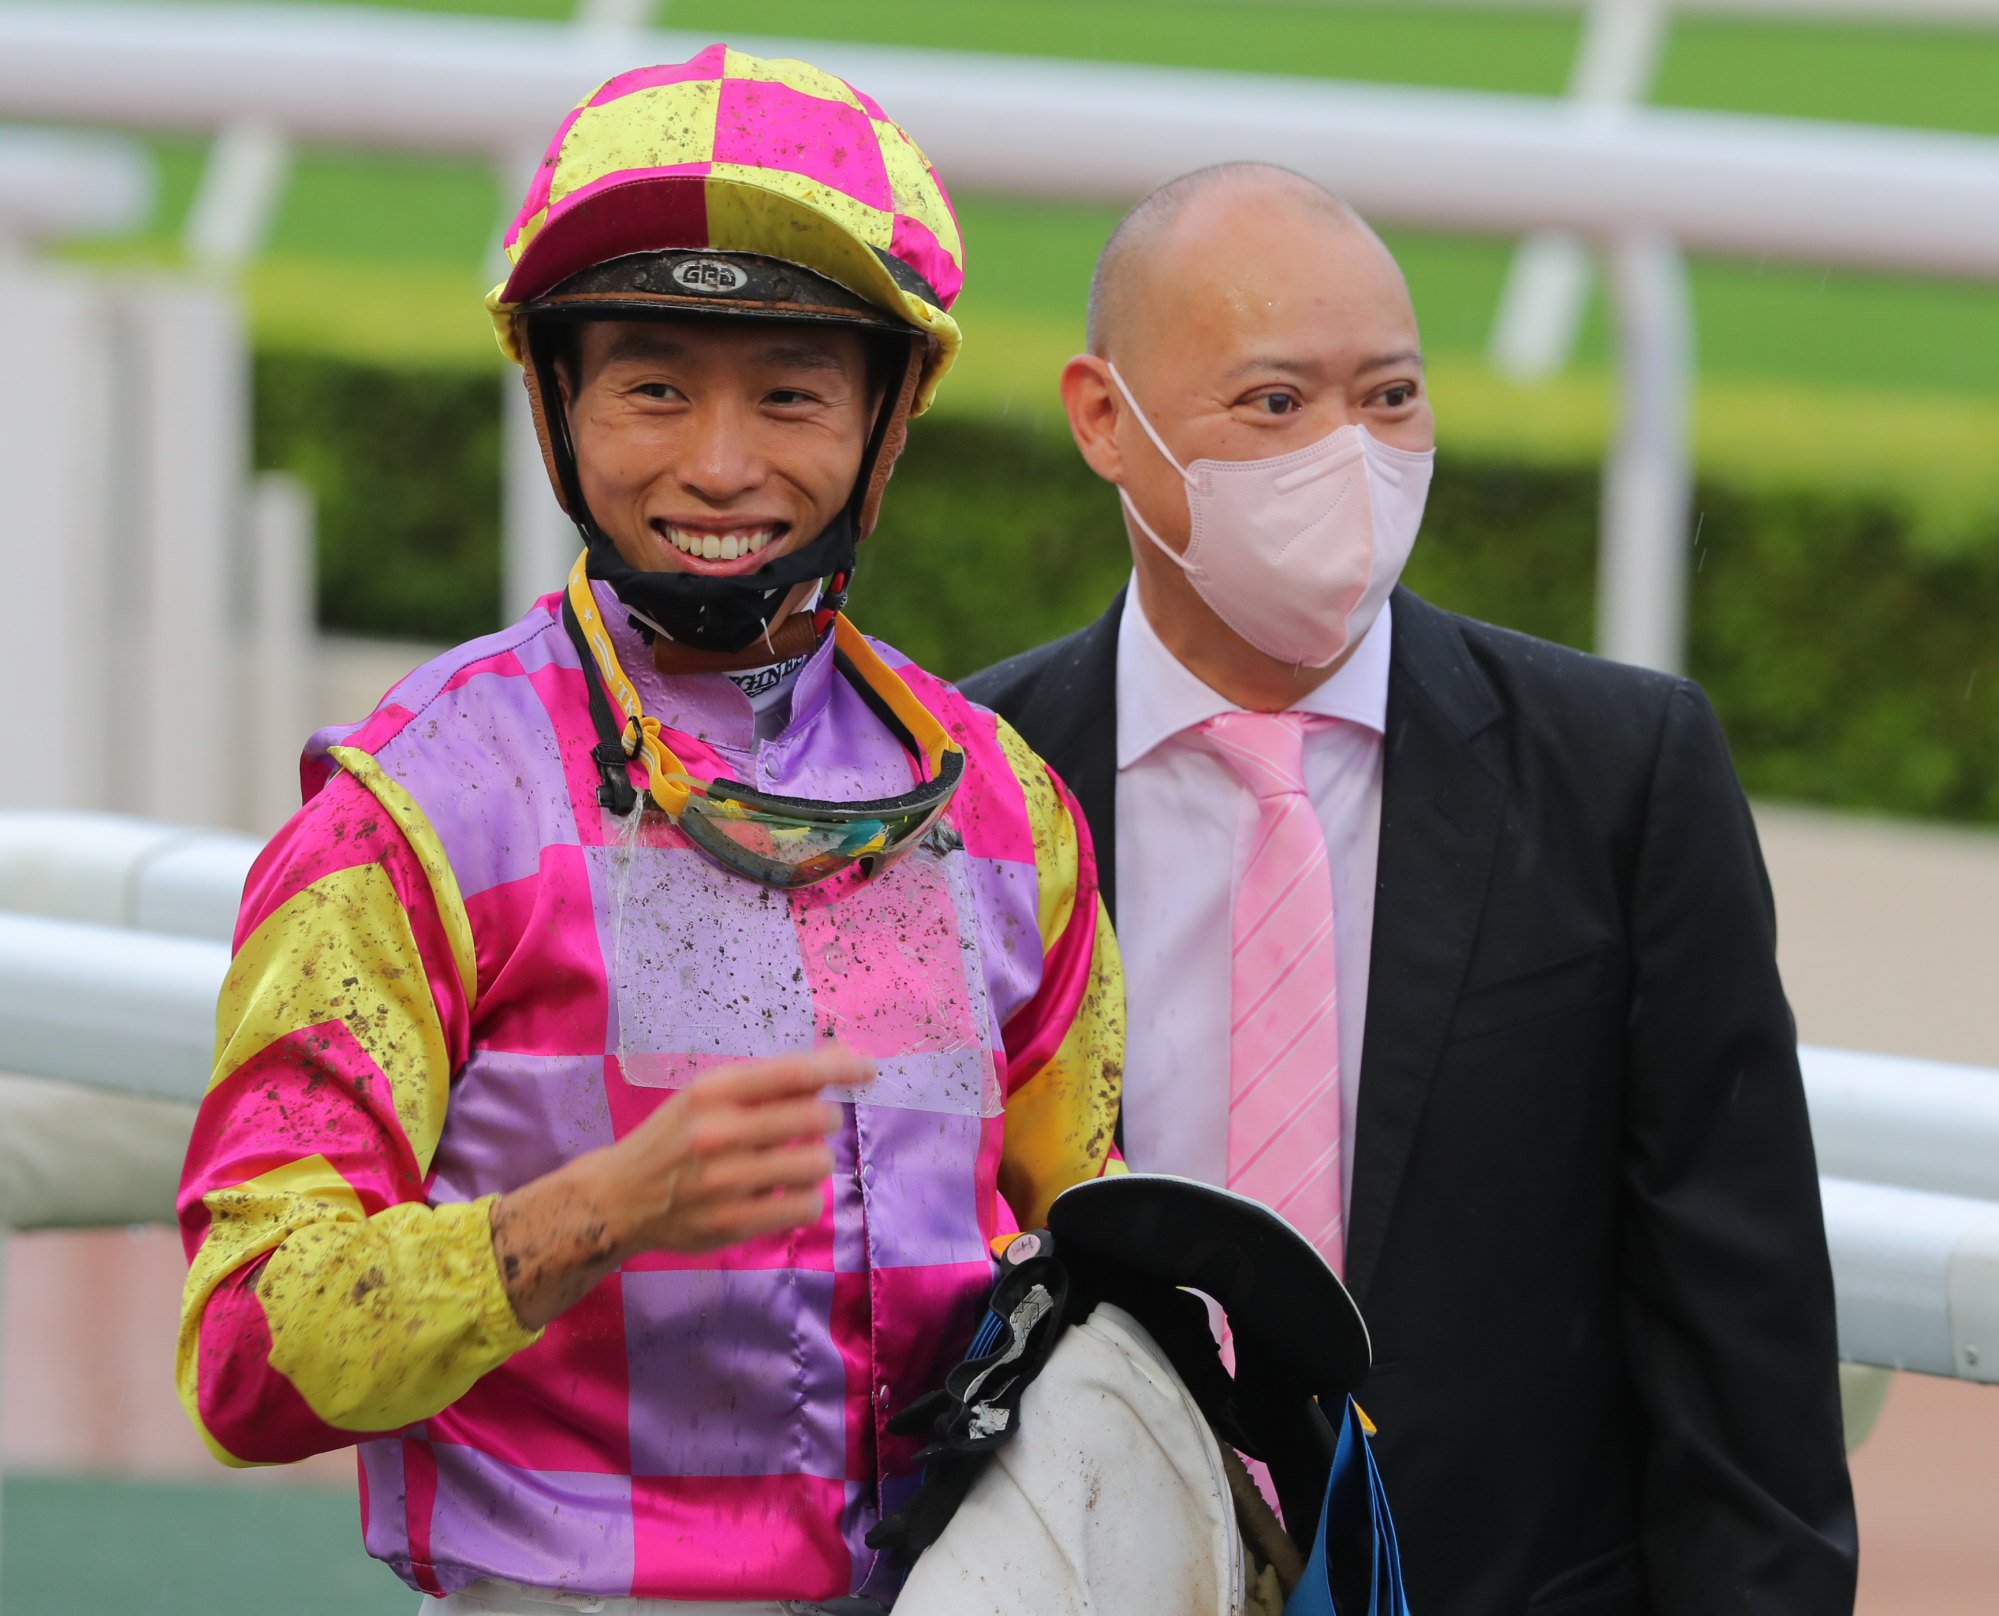 Jockey Vincent Ho and trainer Chris So are all smiles after a victory.